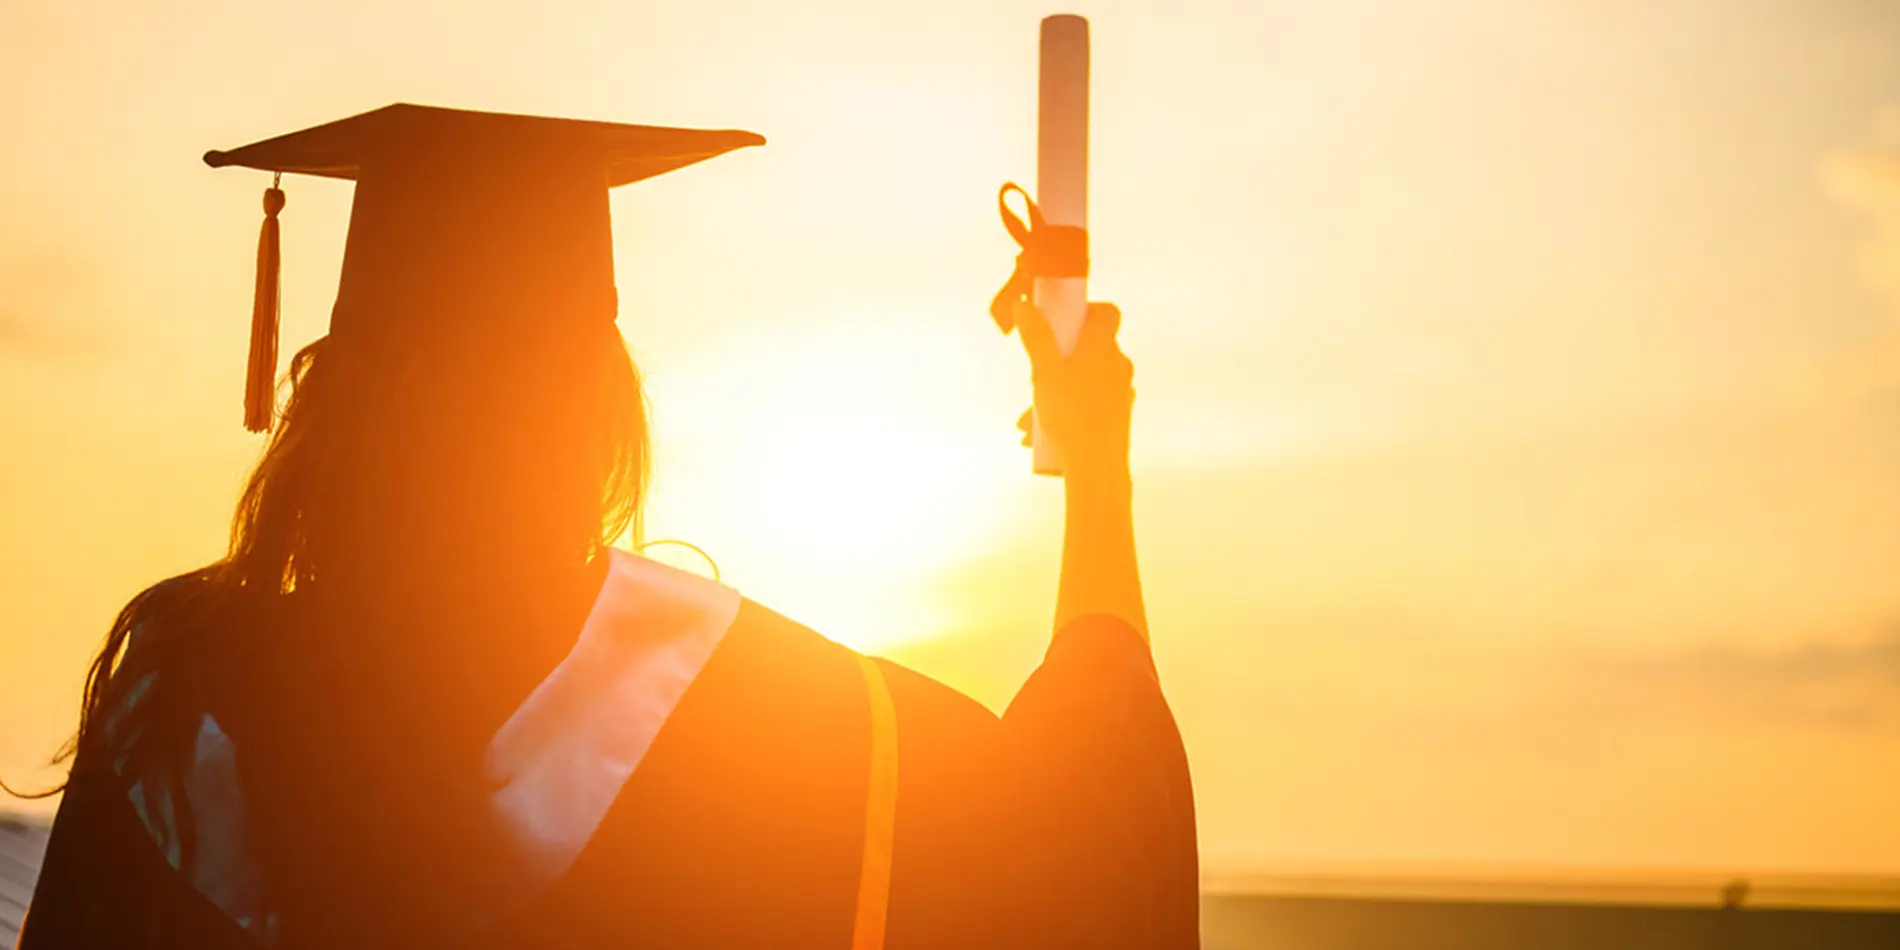 A person with traditional graduation regalia-- like a cap with tassel, hood, and robe-- is holding a graduation scroll facing a sunset shown from the back.